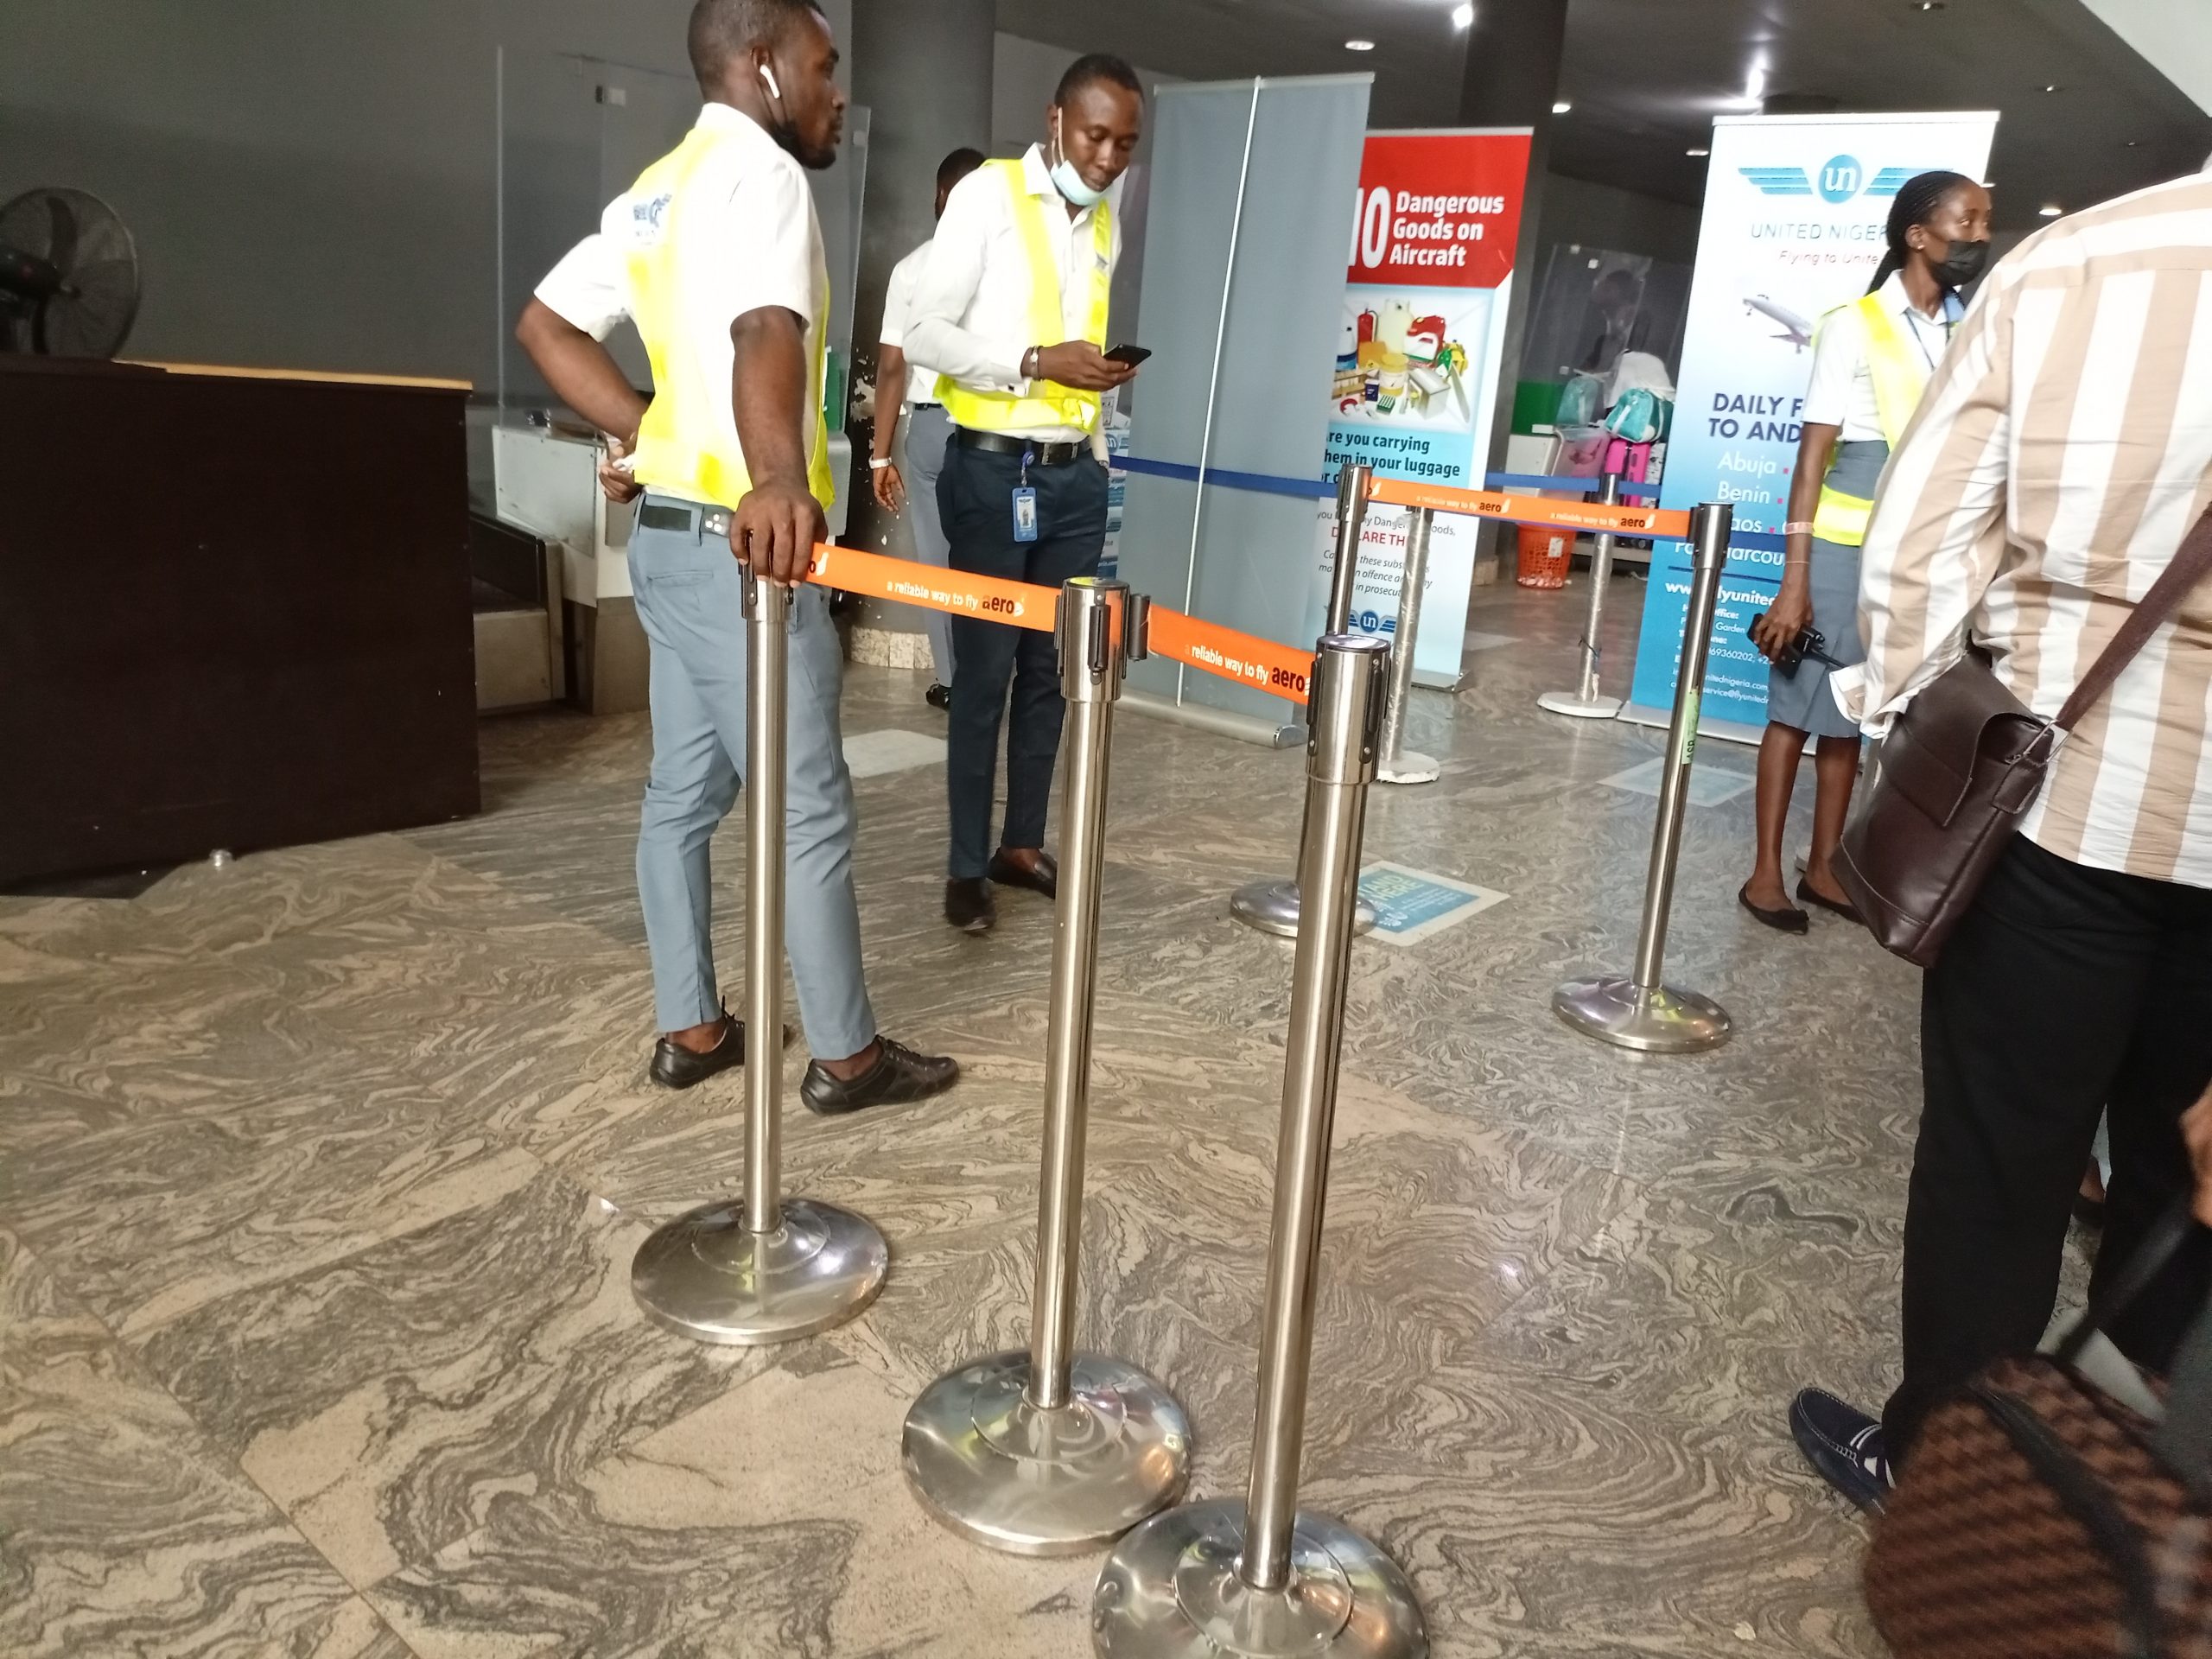 United Nigeria Airlines passengers besiege the airline's counter after being forced to disembark following battery failure of their flight to Lagos from Asaba Airport on June 28, 2021. | The Trent Photo